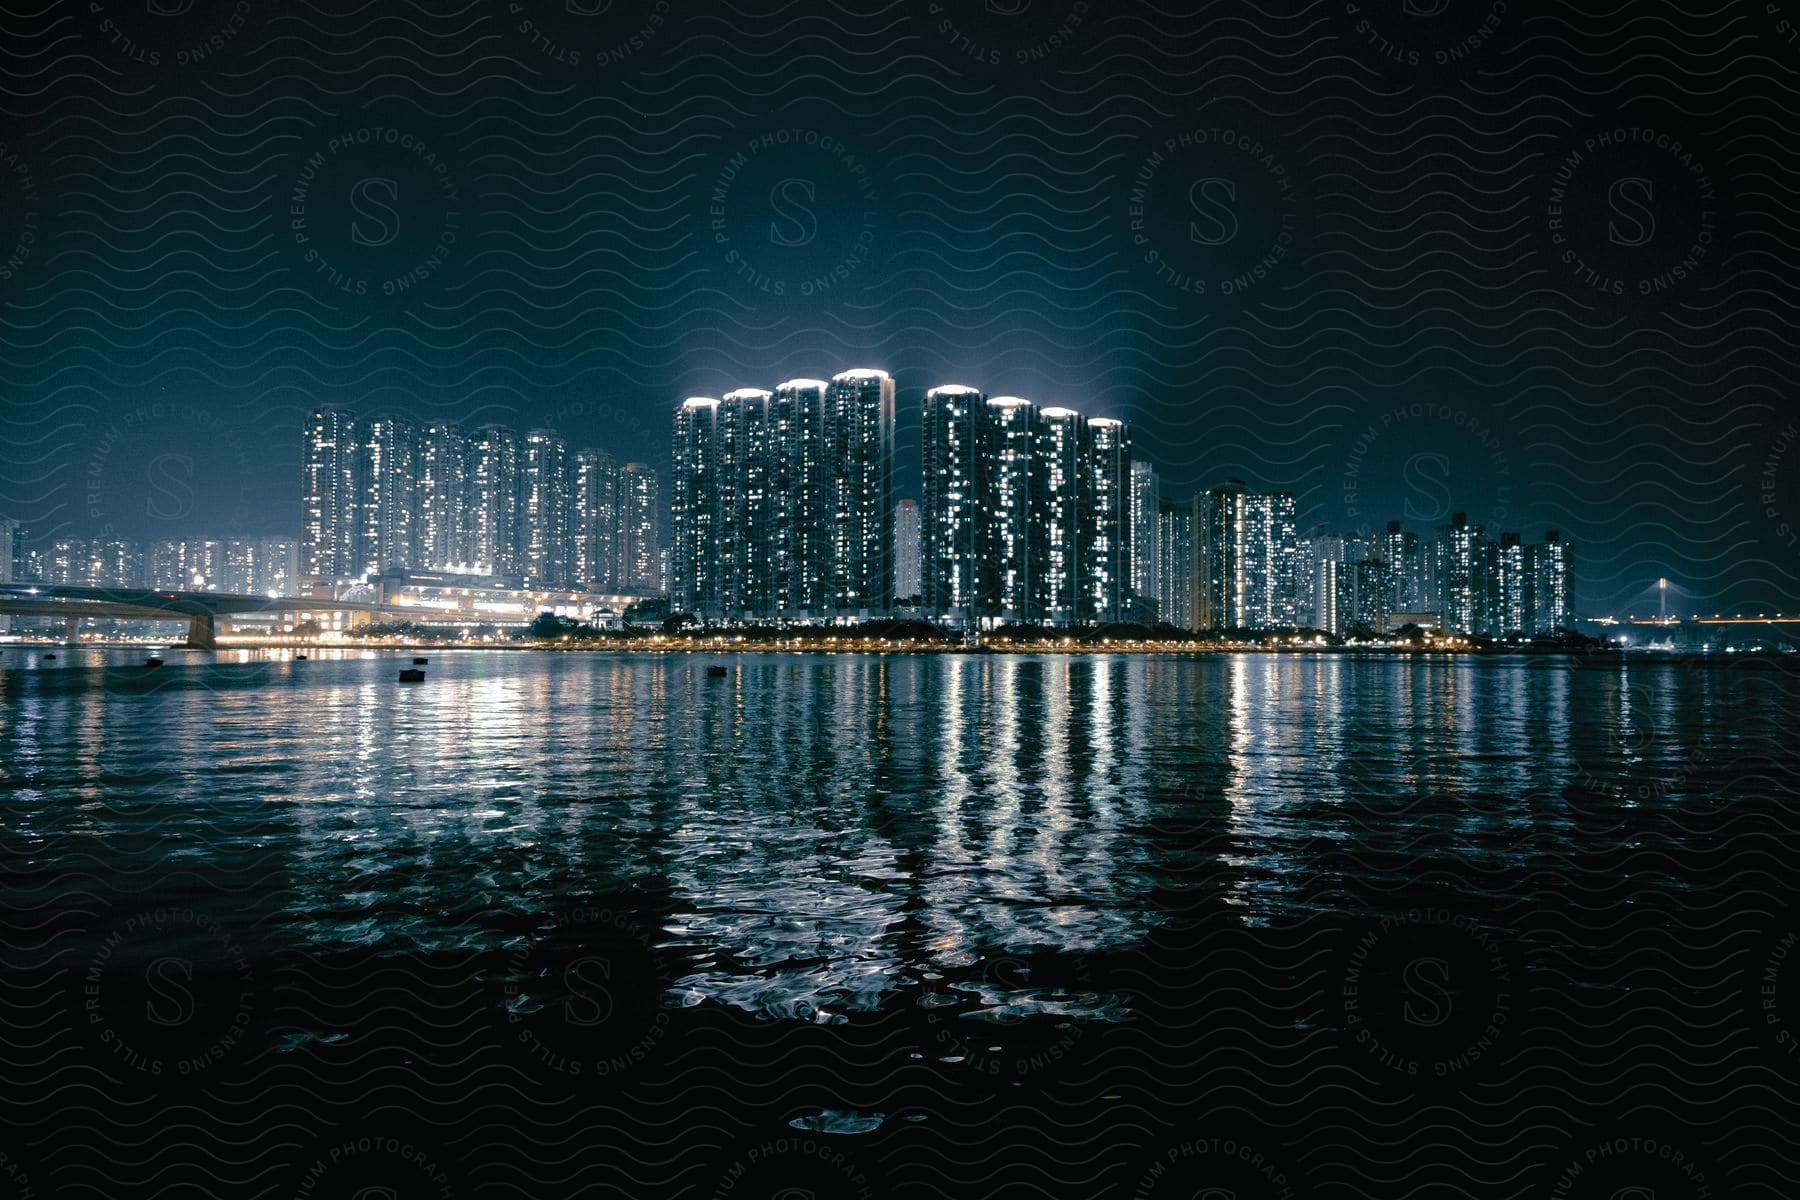 A bright city at night with many skyscrapers is seen over the water